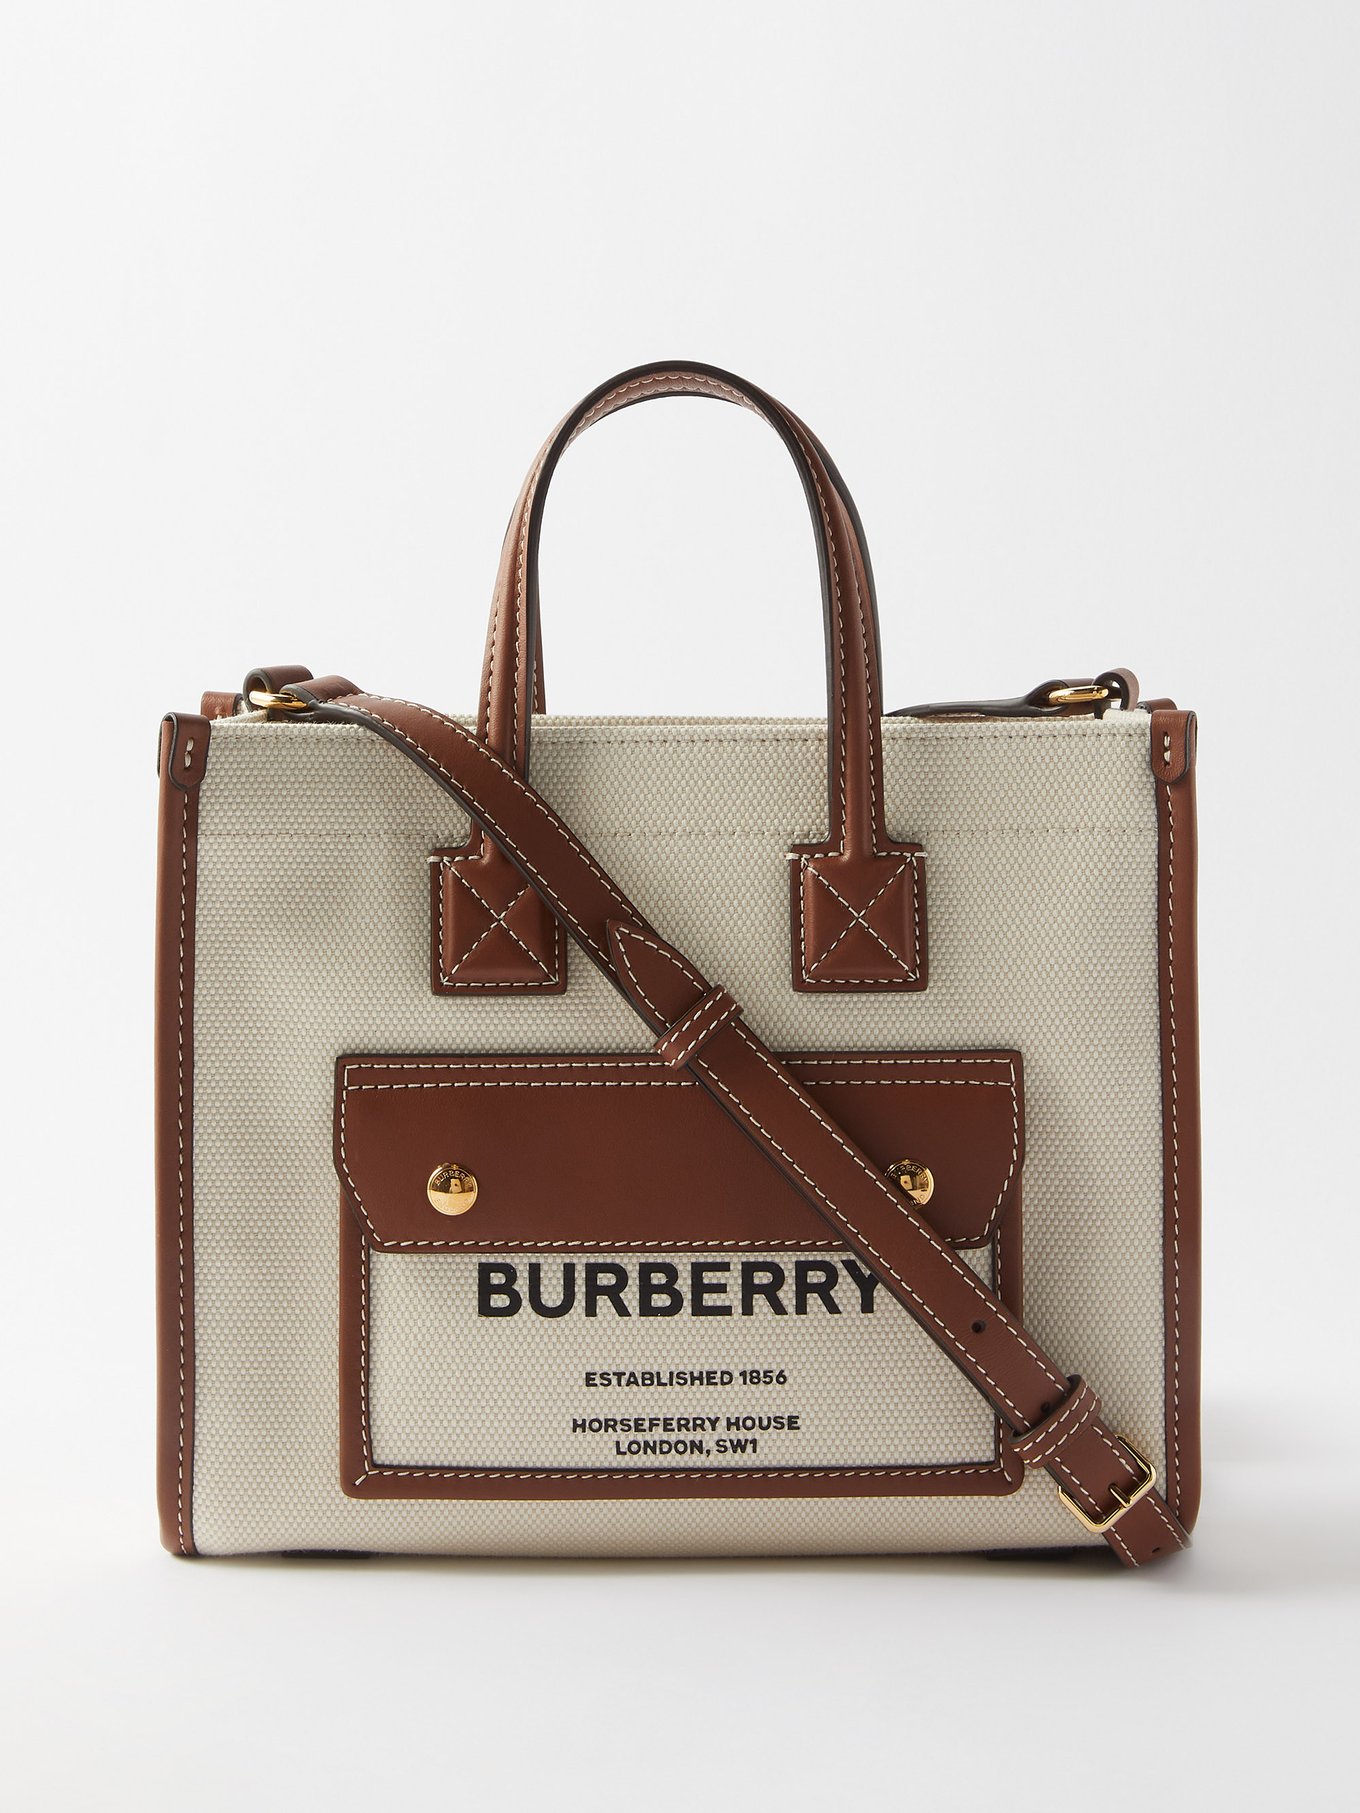 Burberry Pre-owned Women's Fabric Tote Bag - Brown - One Size